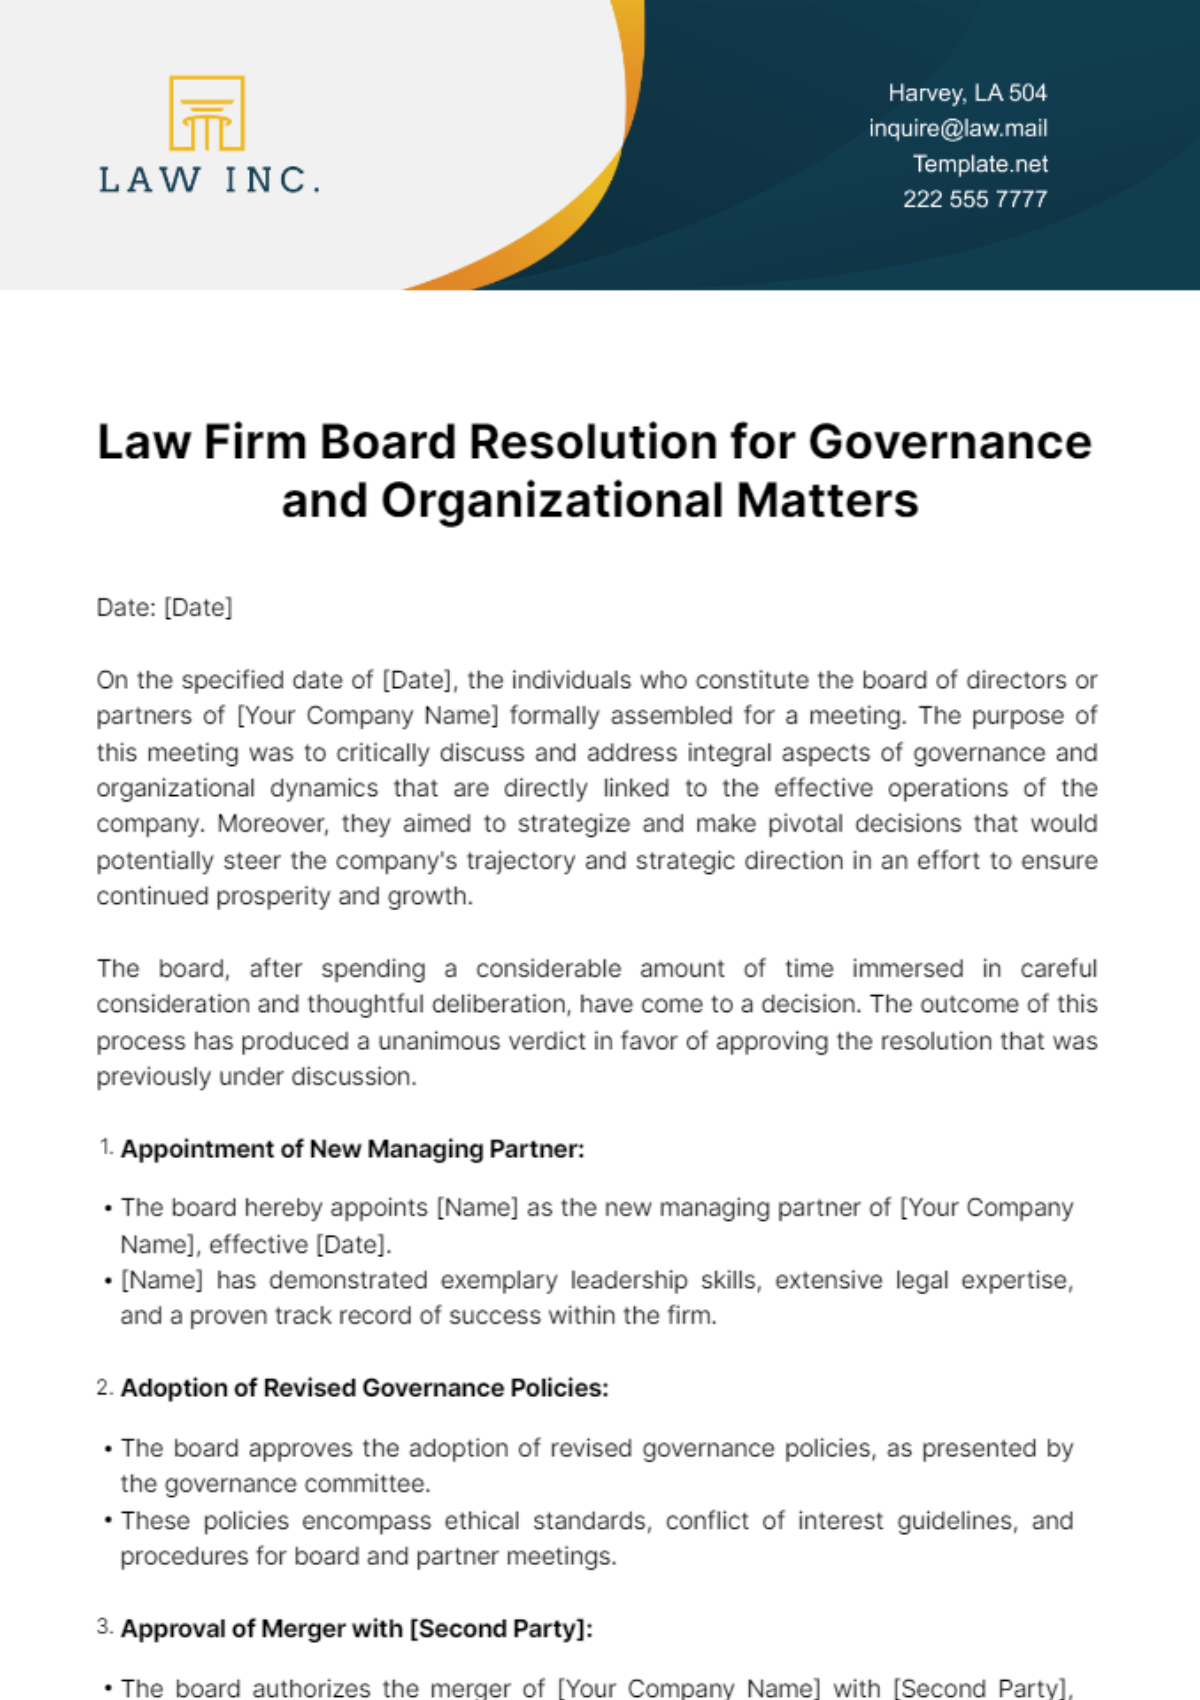 Law Firm Board Resolution for Governance and Organizational Matters